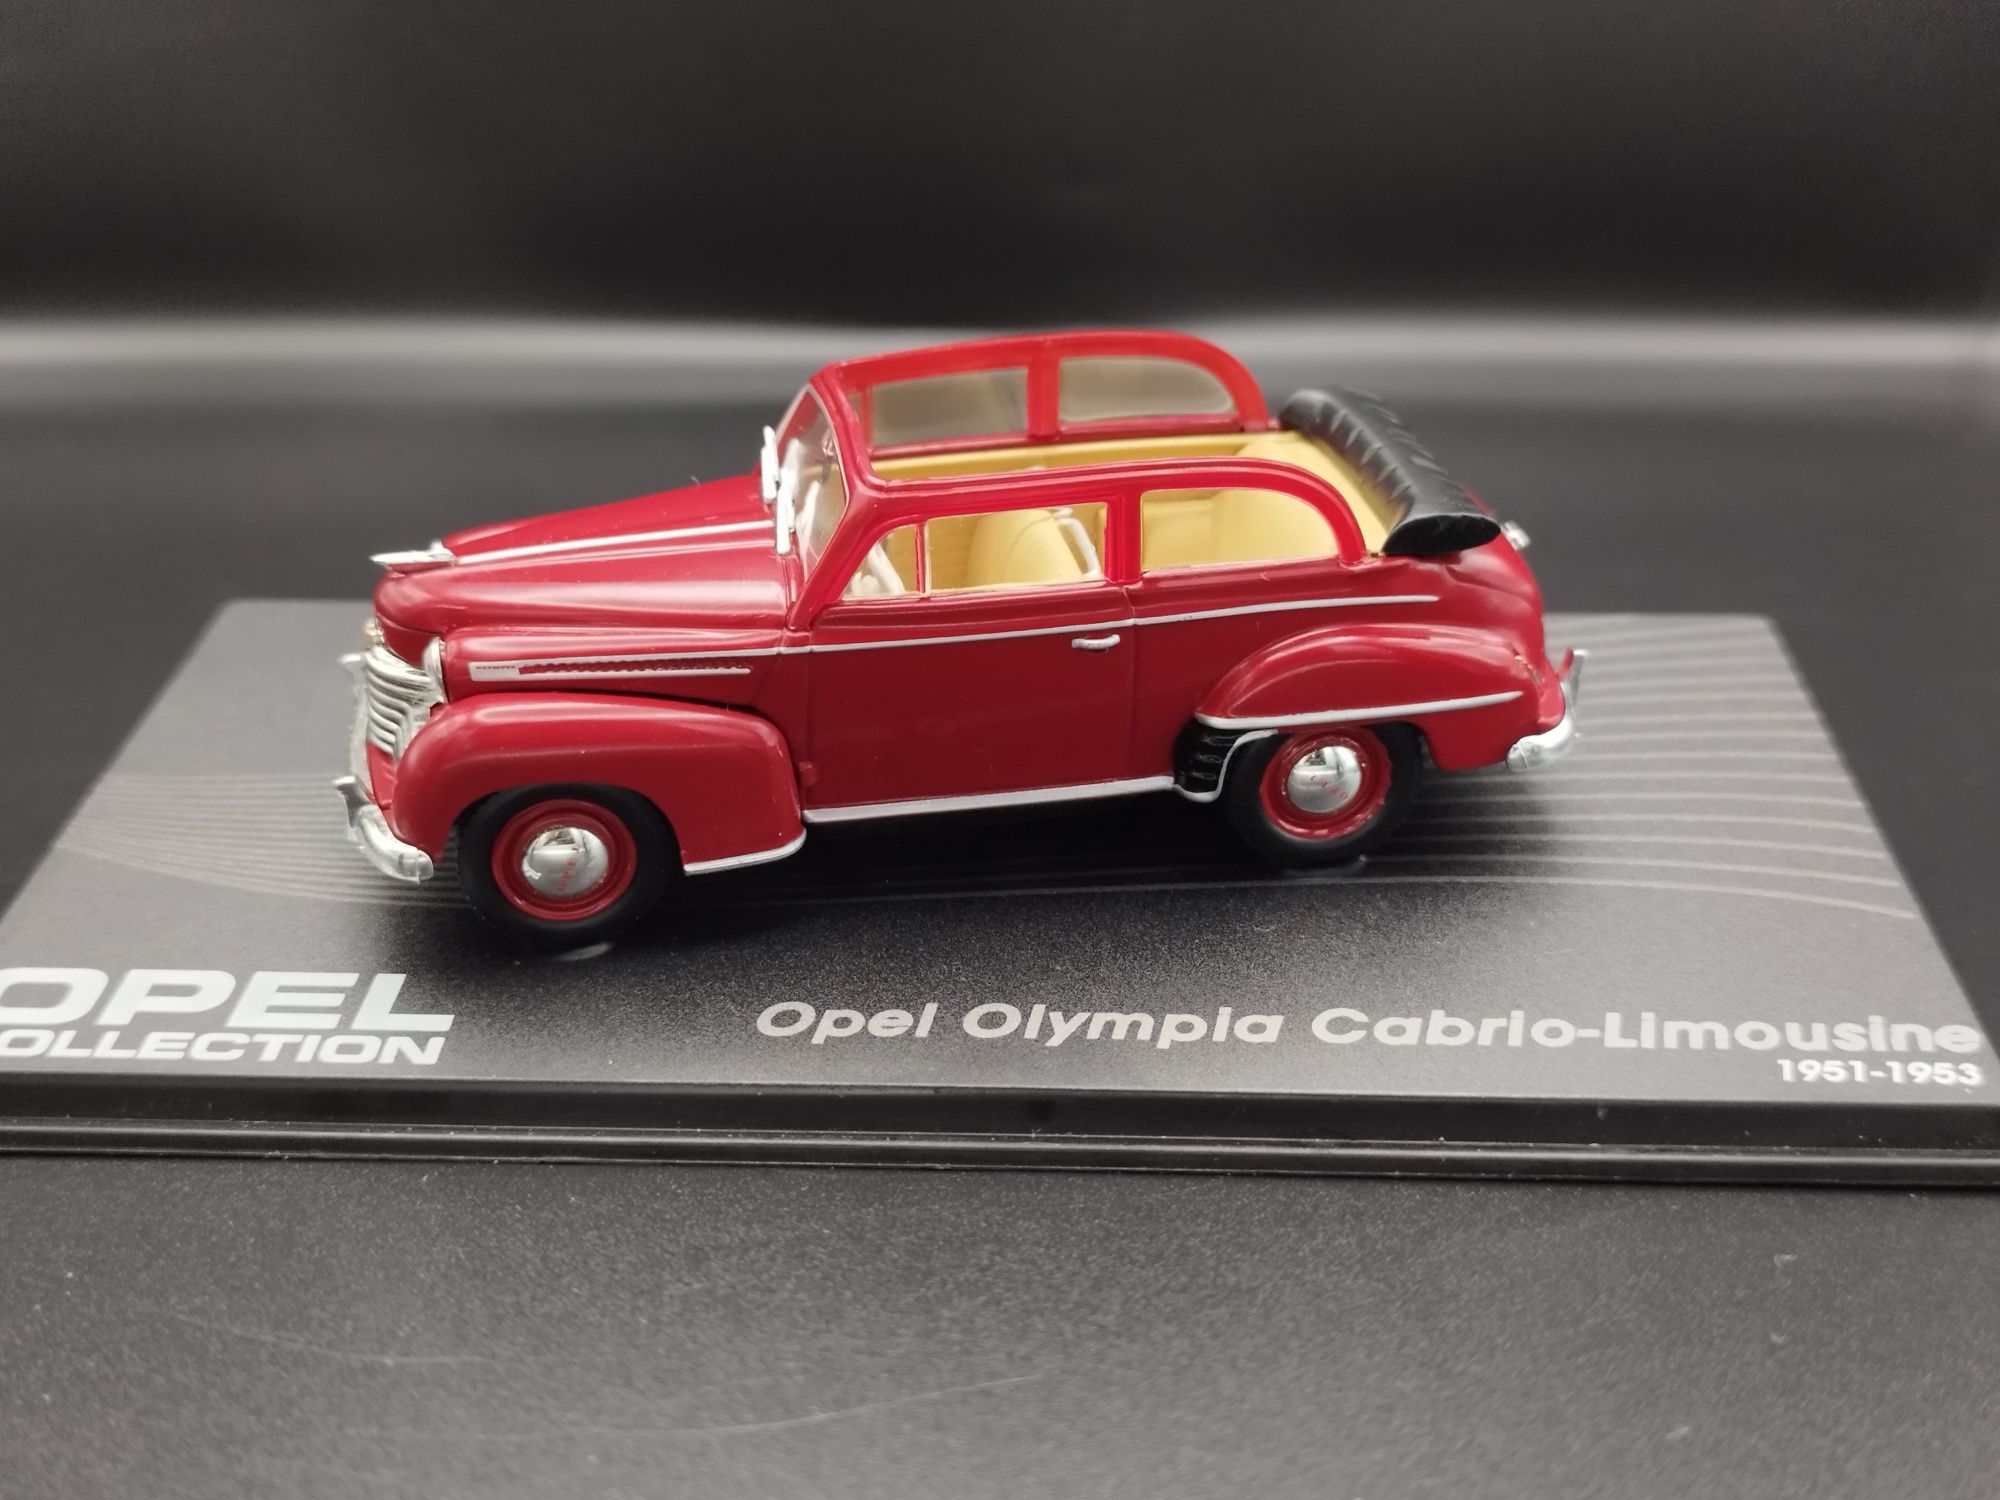 1:43 Opel Collection 1951-53 Opel Olympia Cabrio-Limousine model